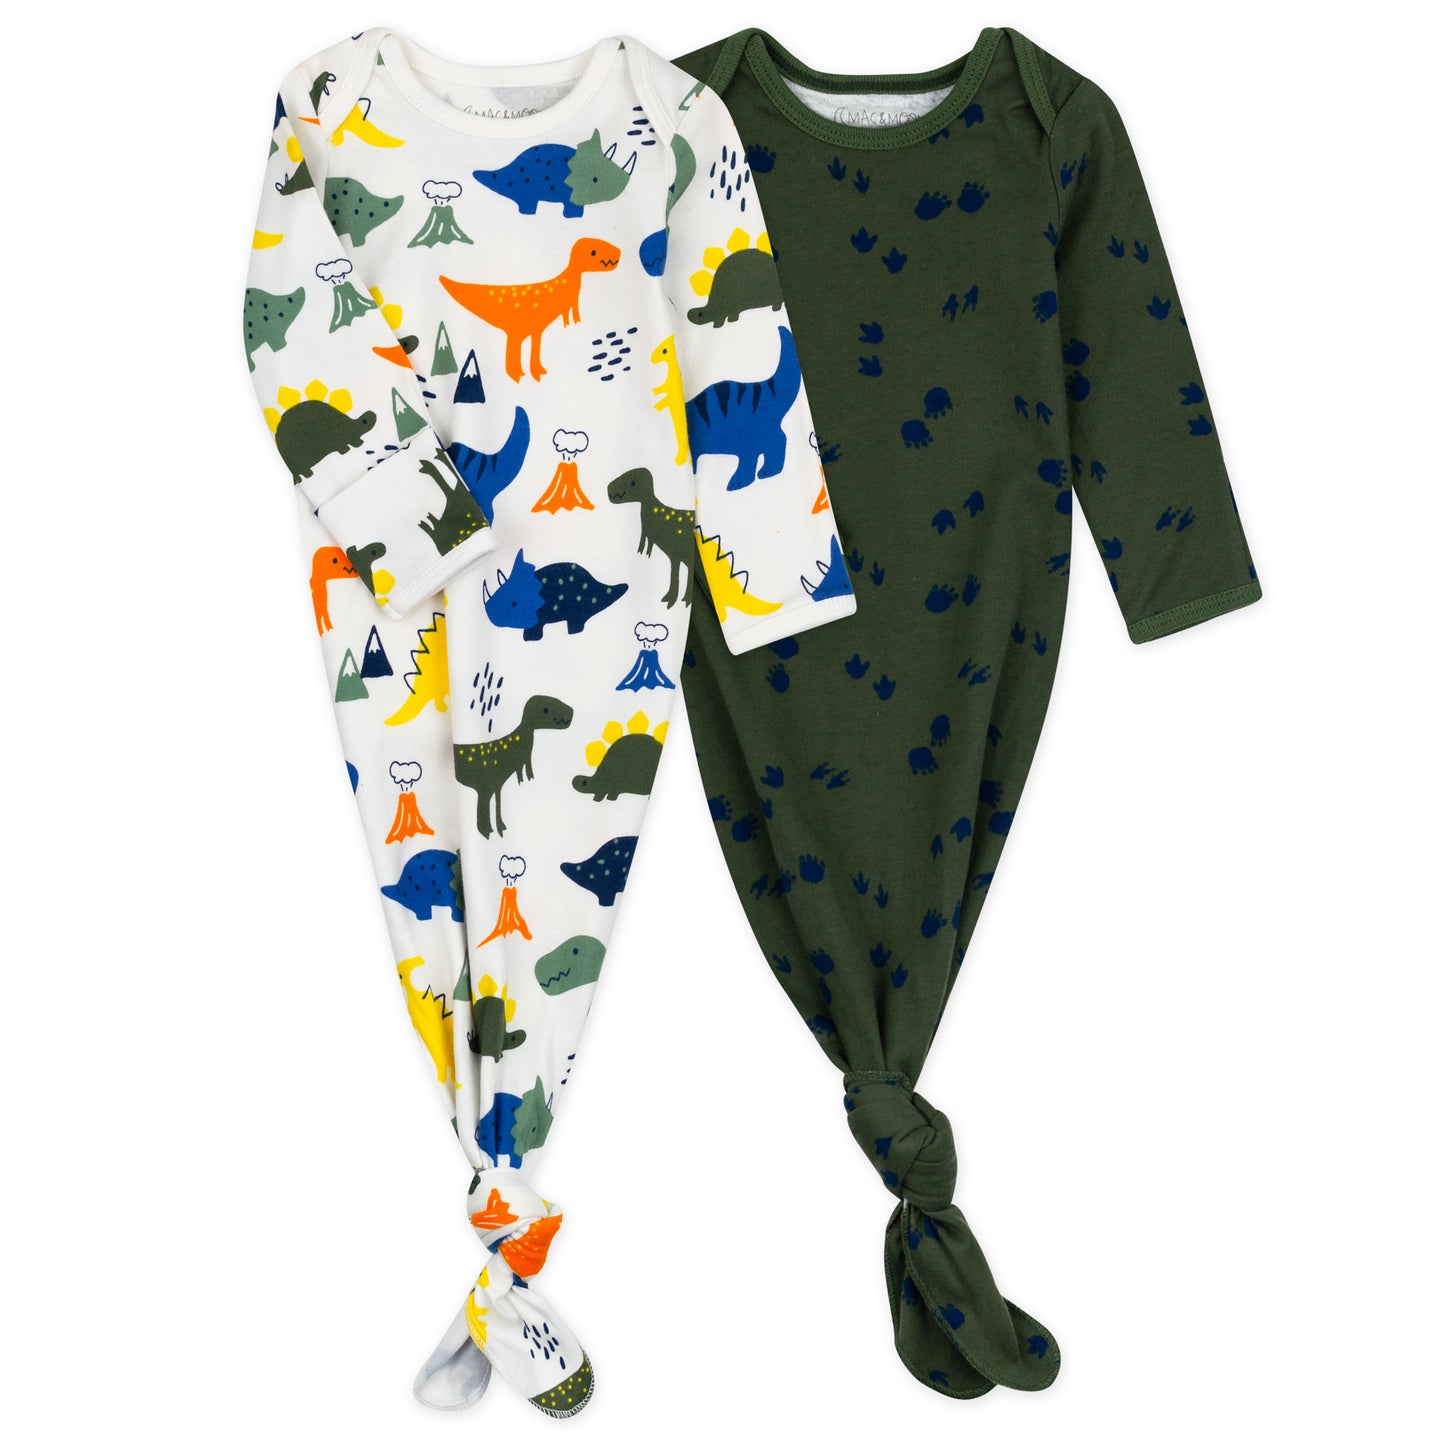 2-Pack Organic Cotton Baby Gown in Dinosaur Print